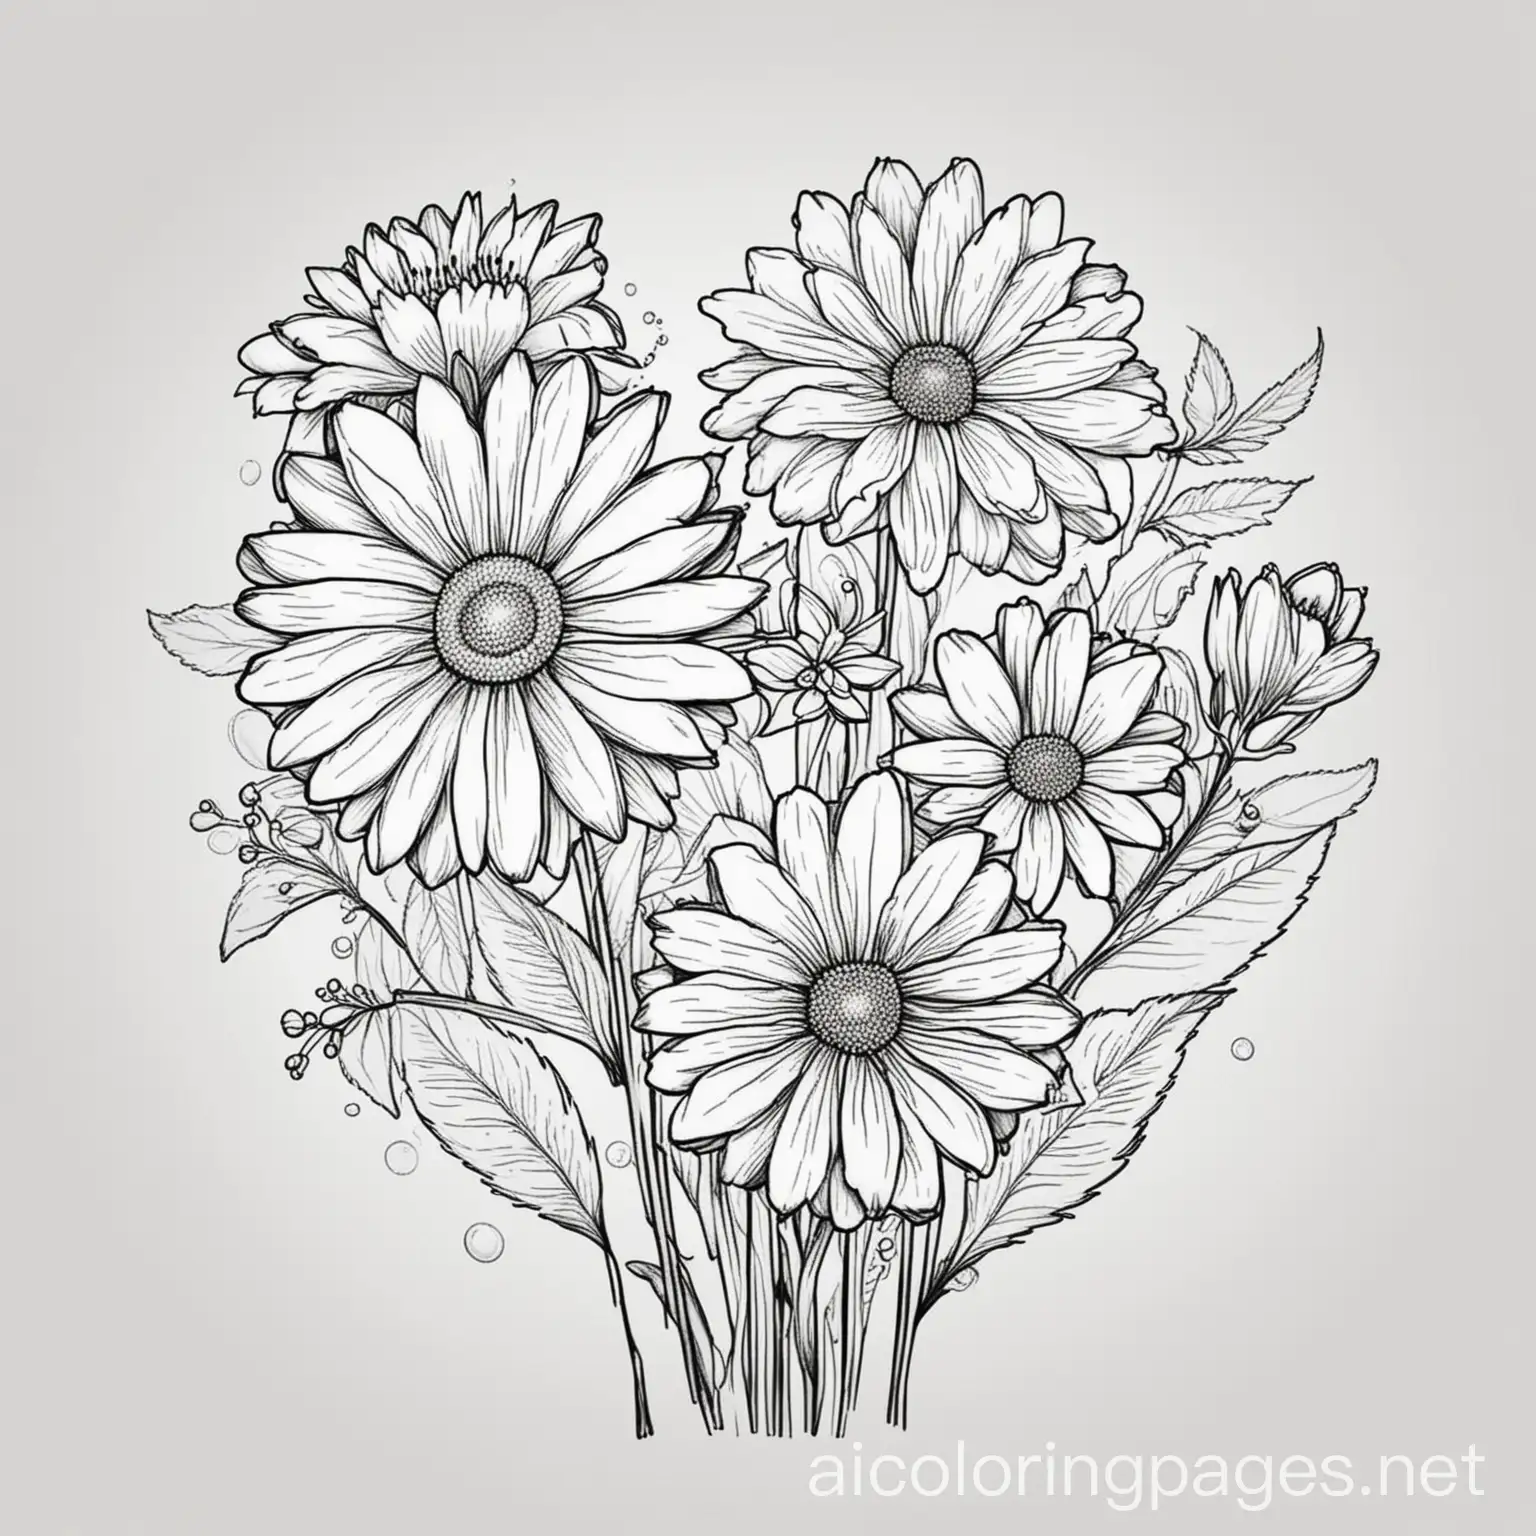 Childrens-Coloring-Page-of-Summer-Flowers-Black-and-White-Line-Art